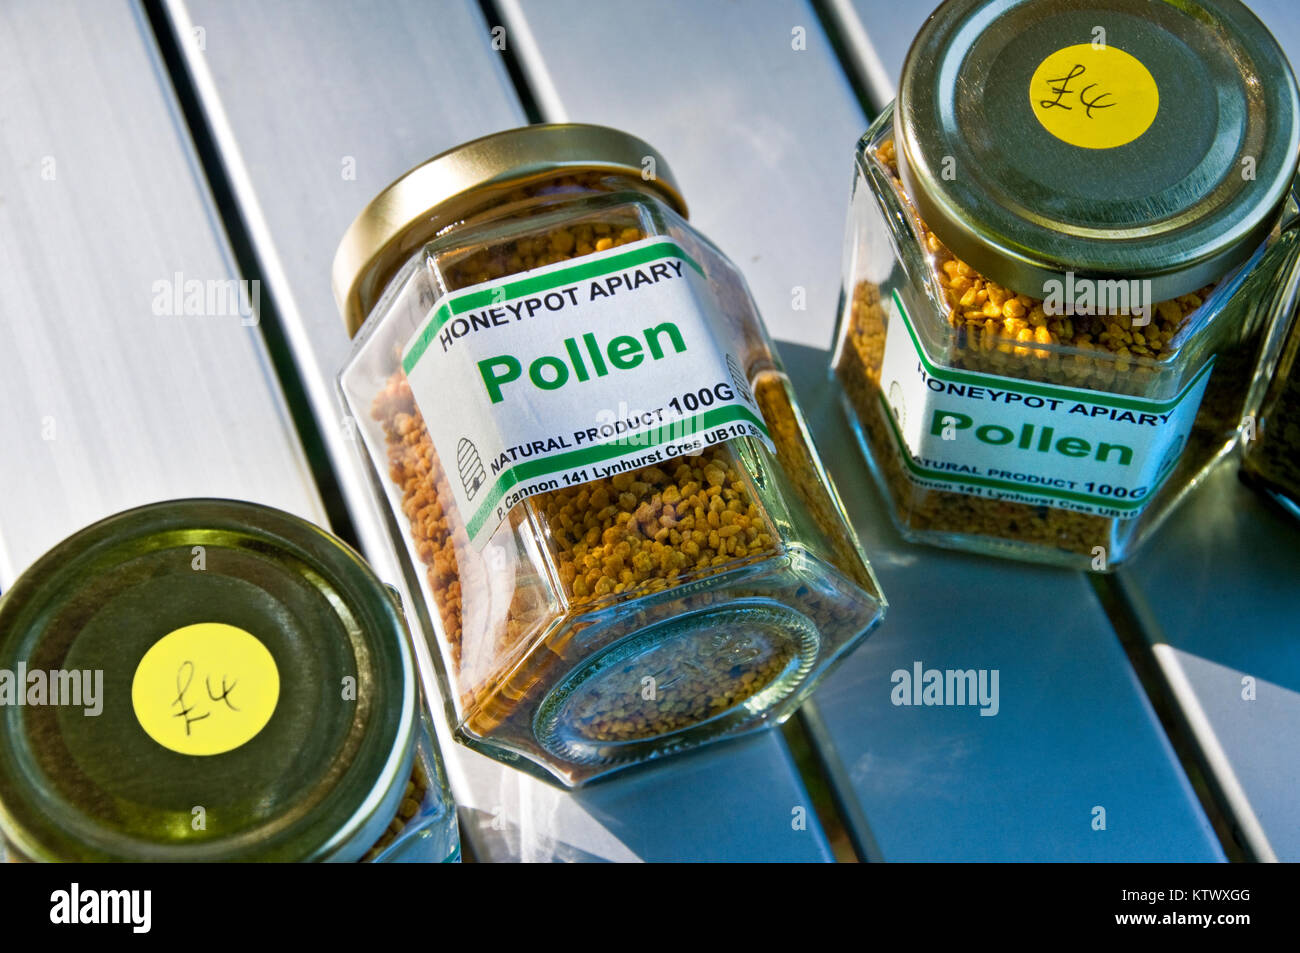 Jars of Pollen health food supplement for sale at £4 each, readily digestible and highly nutritious food produced as a by-product by honey bees Stock Photo